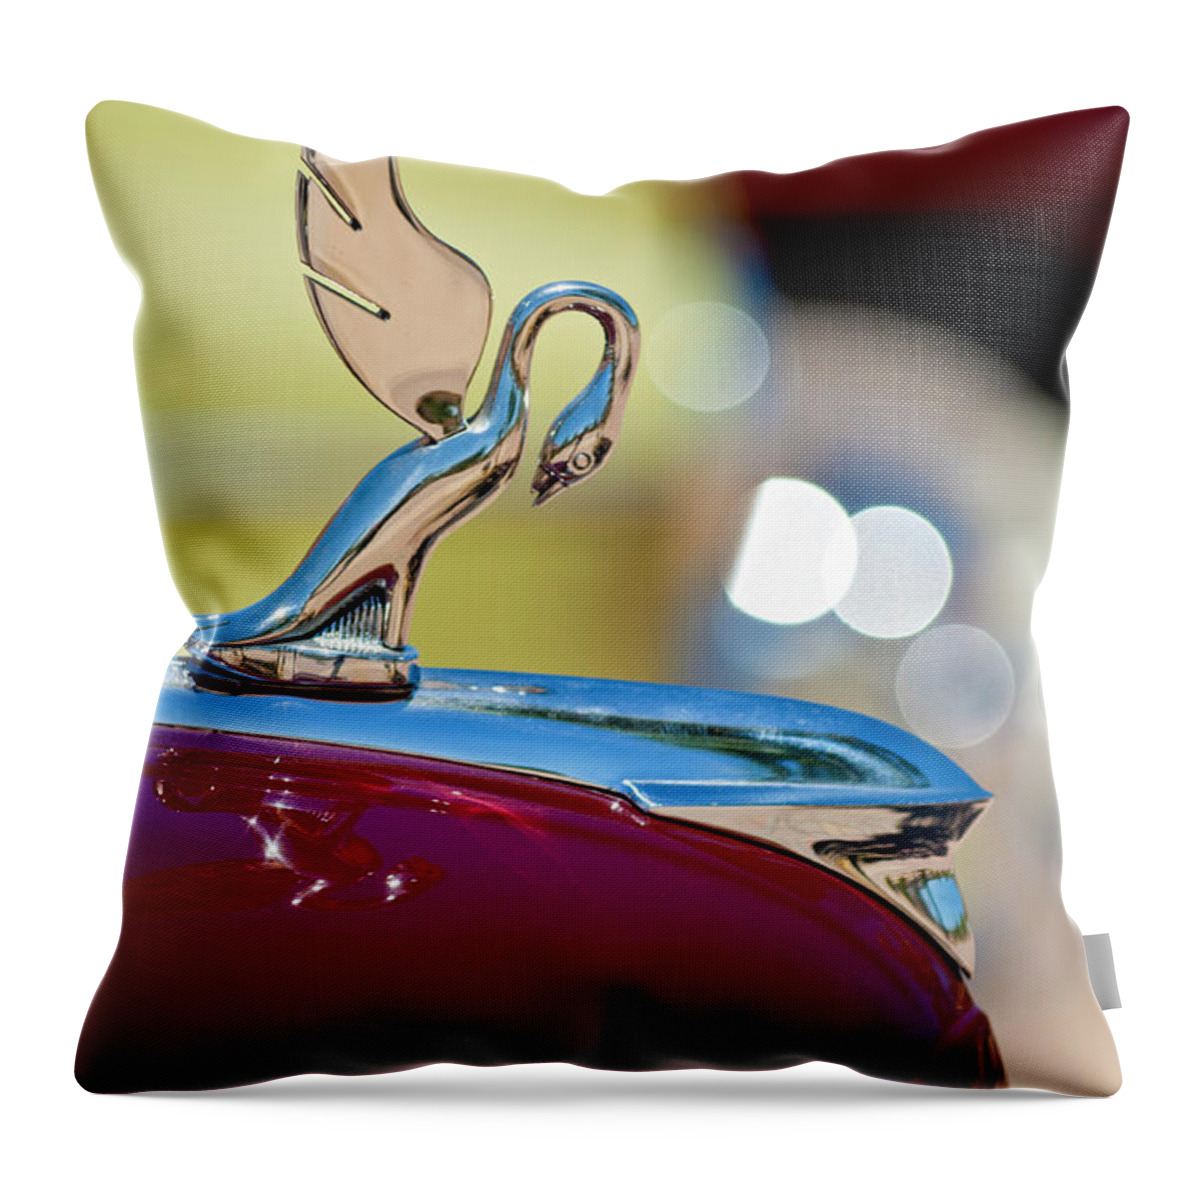 1947 Packard Coupe Throw Pillow featuring the photograph 1947 Packard Coupe Hood Ornament by Jill Reger